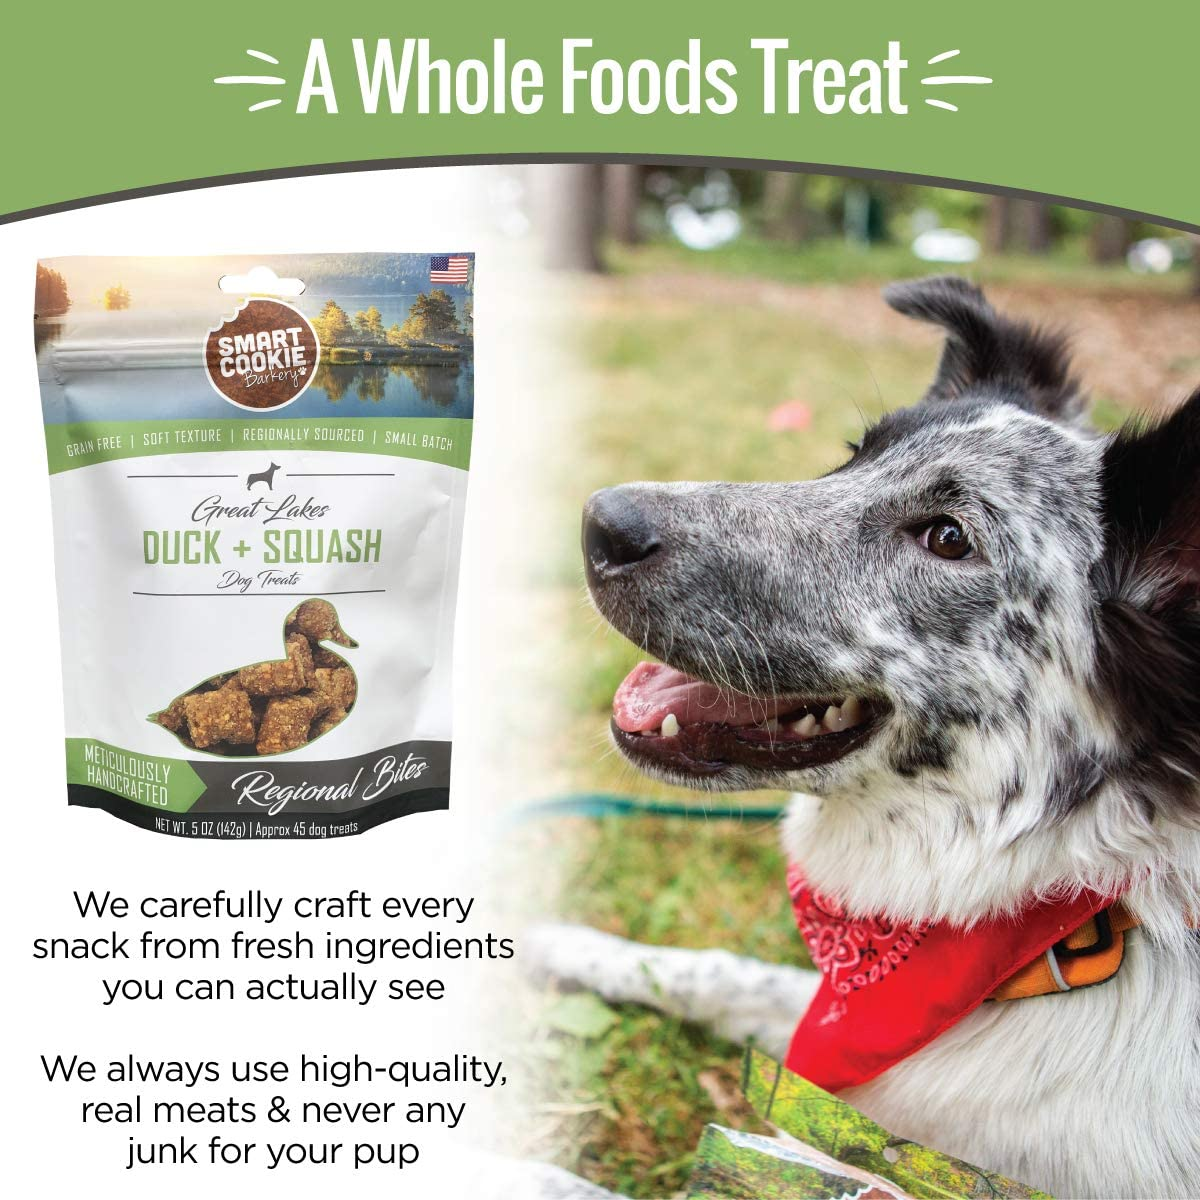 All Natural Soft Dog Treats - Limited Ingredient Training Treats for Dogs and Puppies with Allergies or Sensitive Stomachs - Grain-Free, Chewy, Human-Grade - Available in 4 Flavors - 5Oz